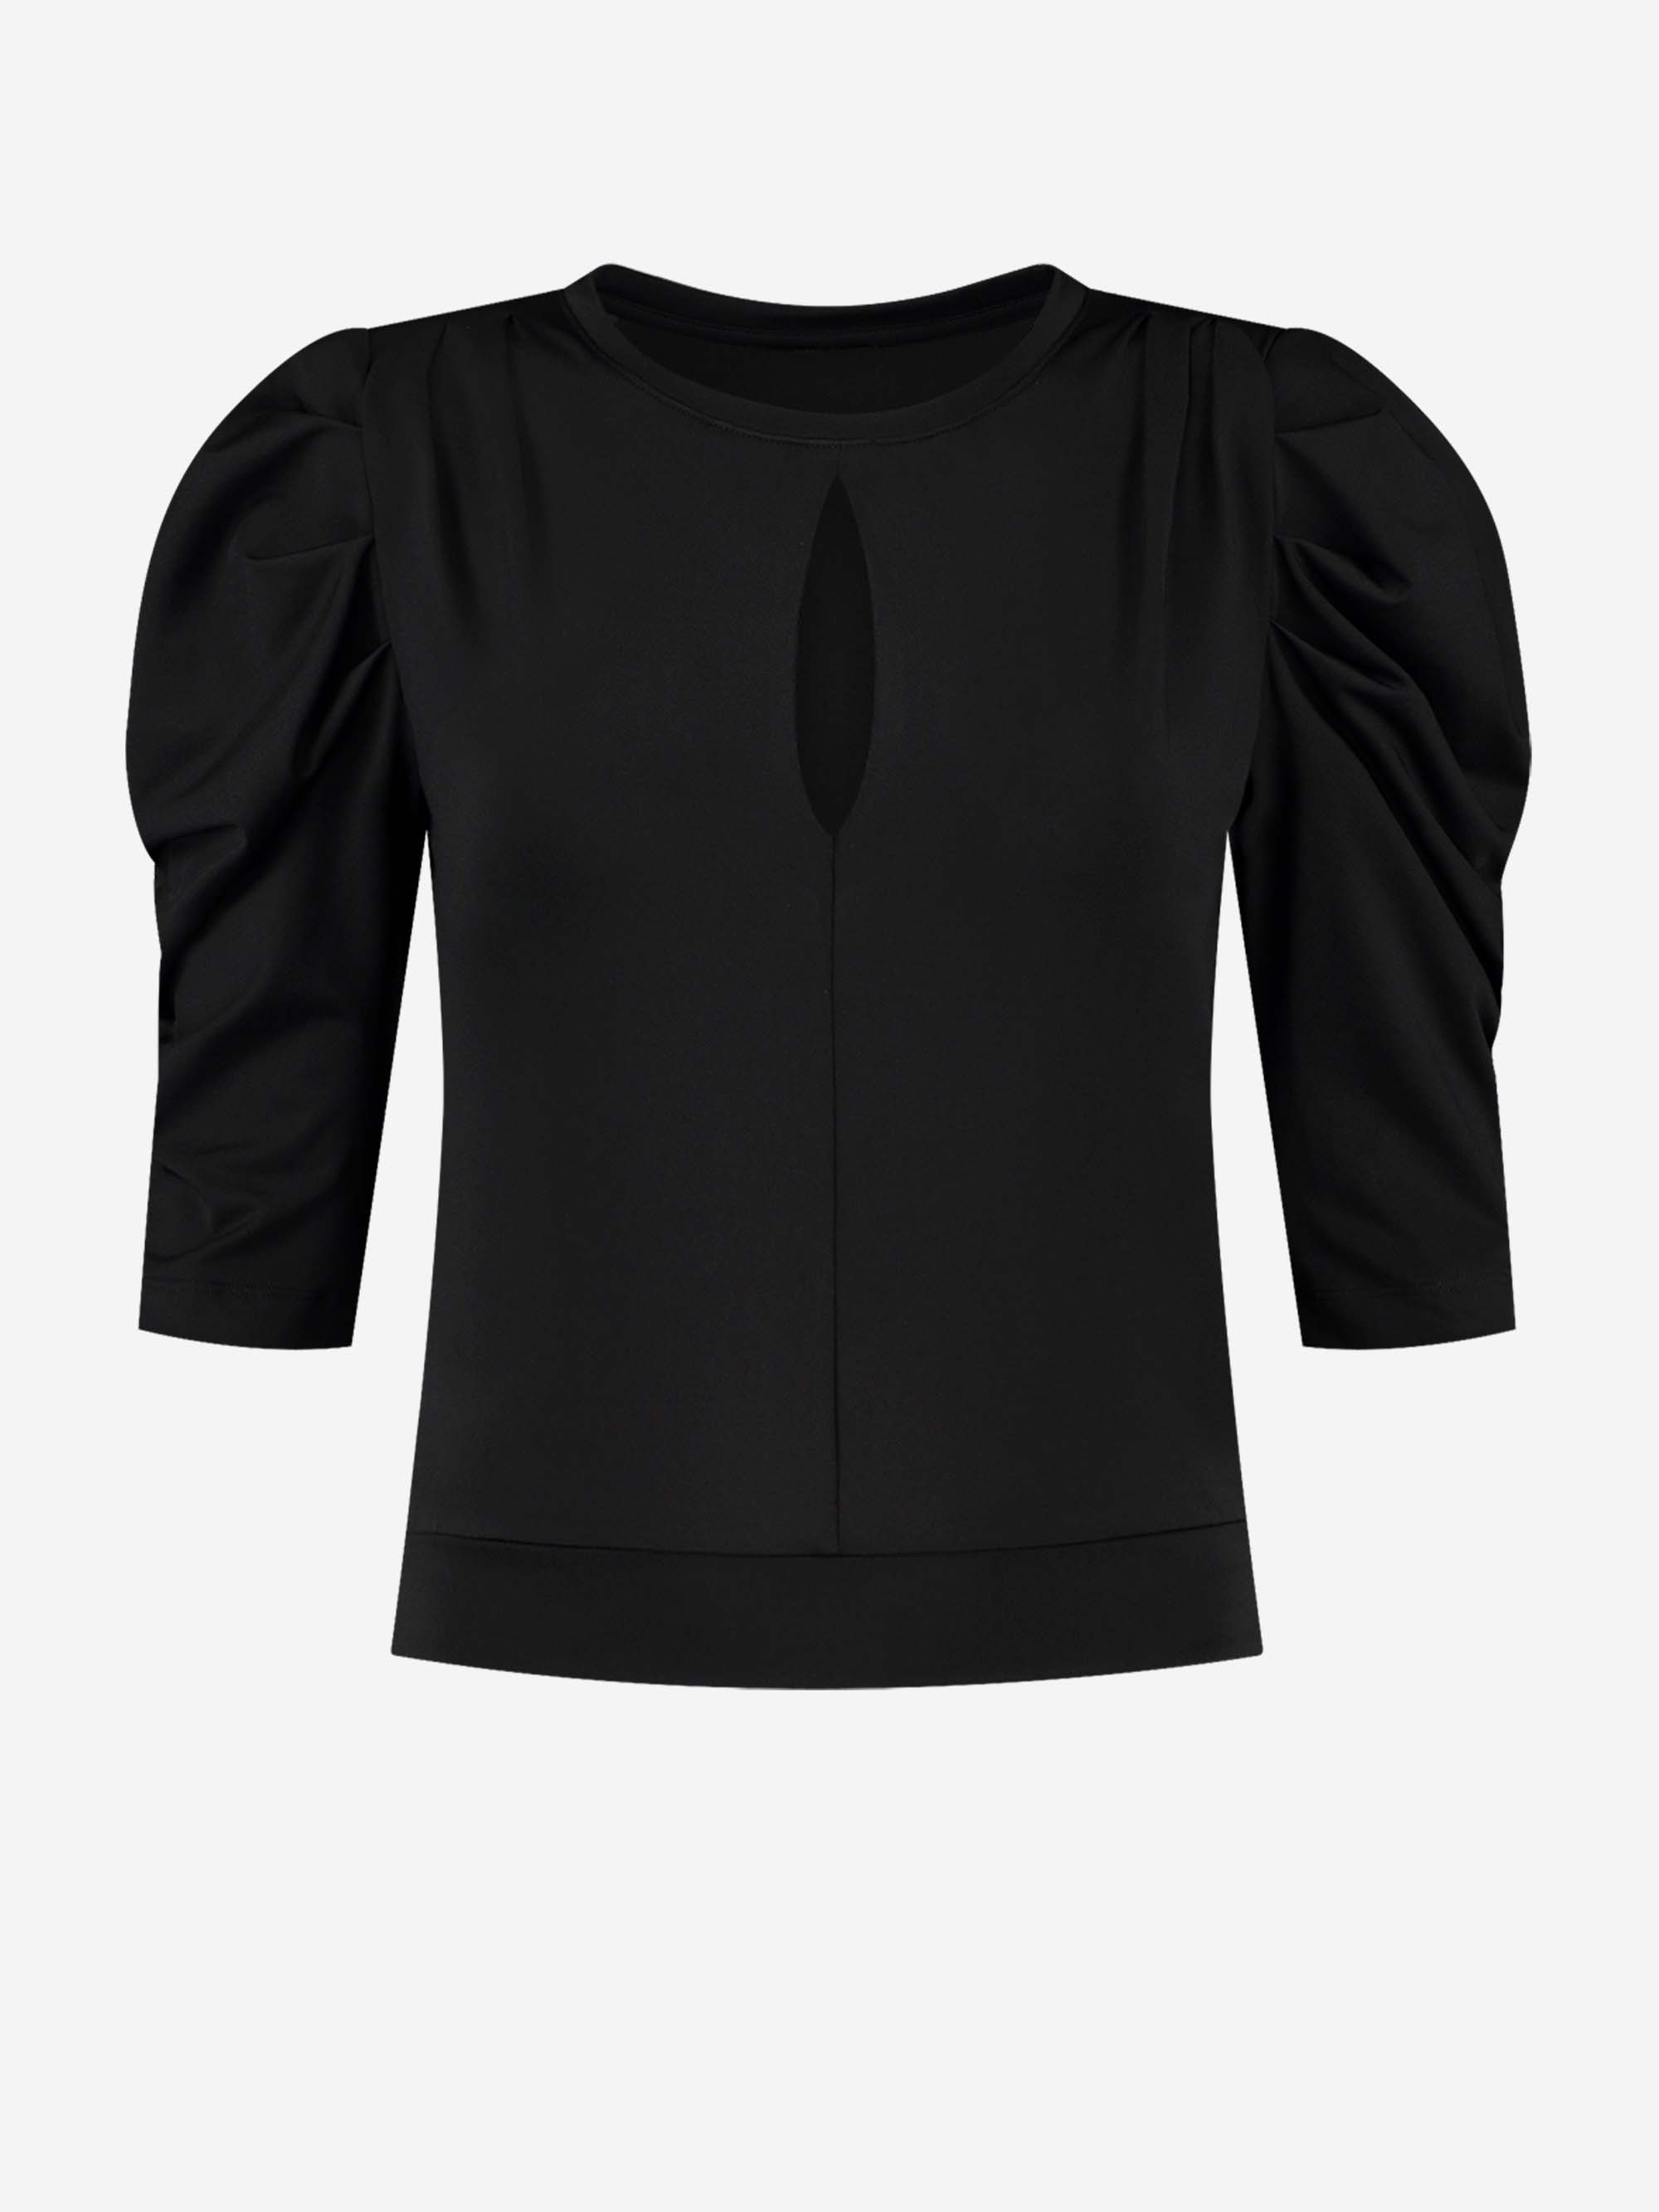 Fitted top with puffed sleeves